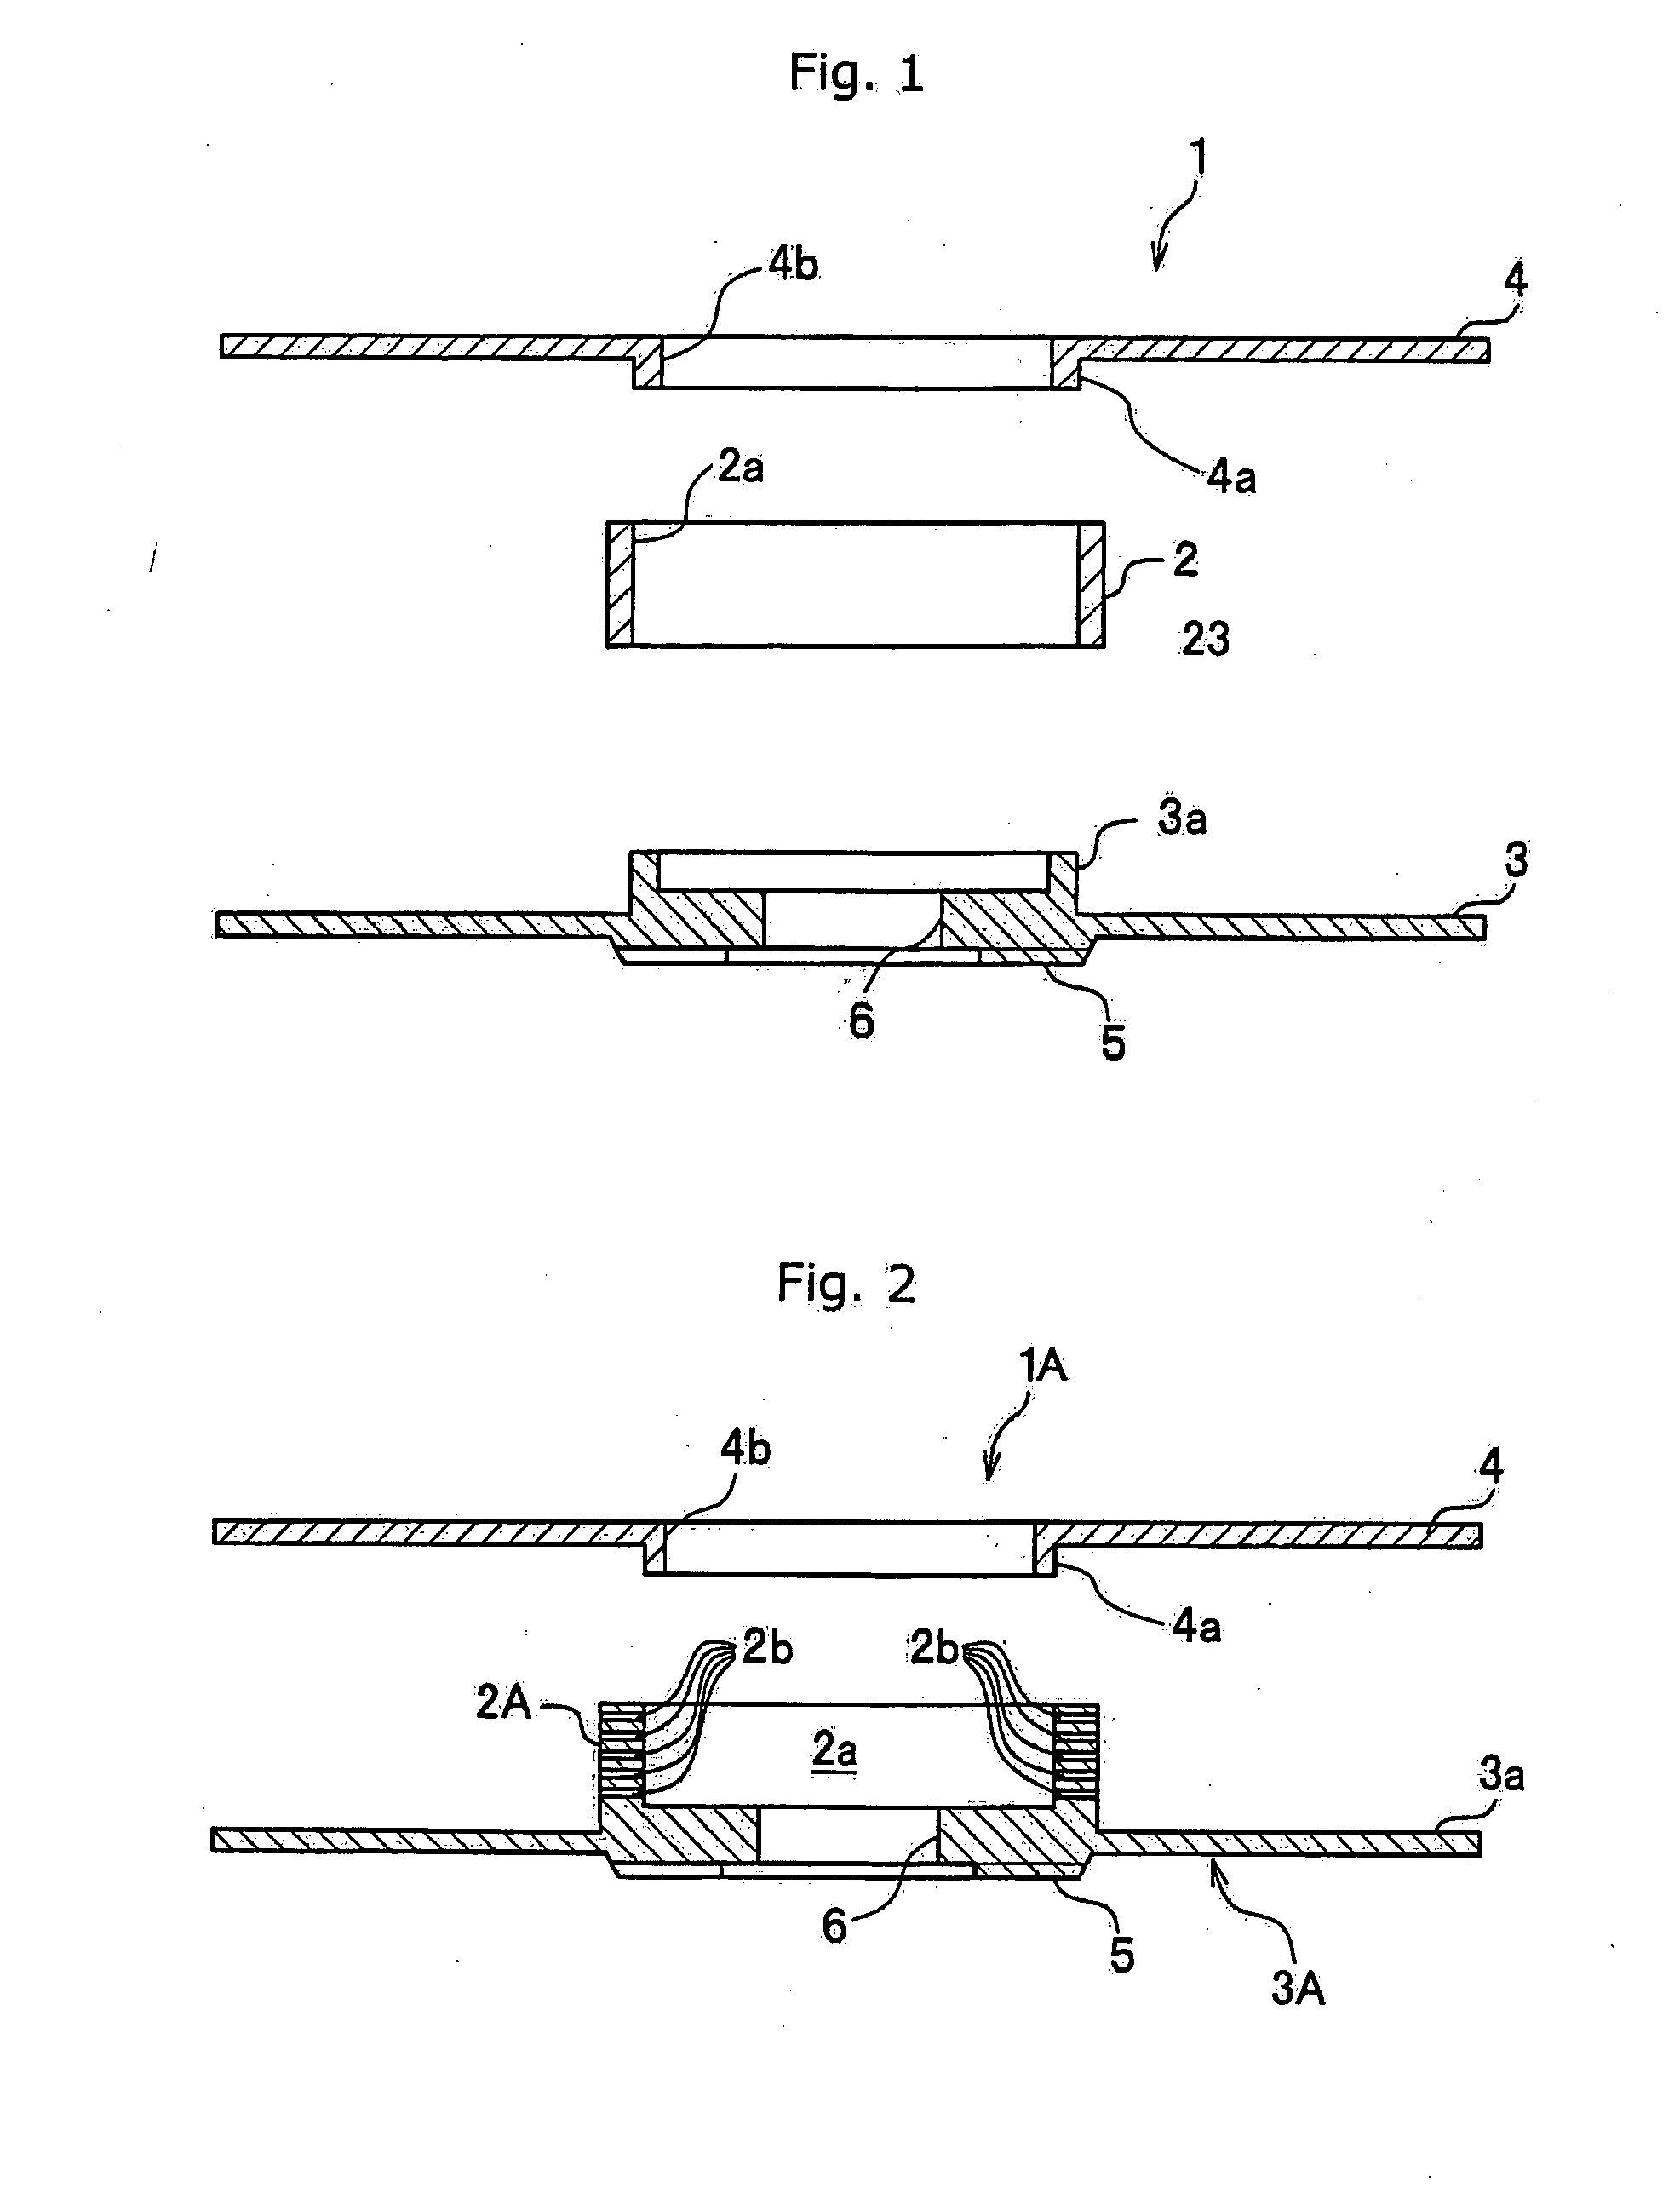 Tape reel, method of and apparatus for attaching tape to reel hub and method of and apparatus for winding tape on tape reel